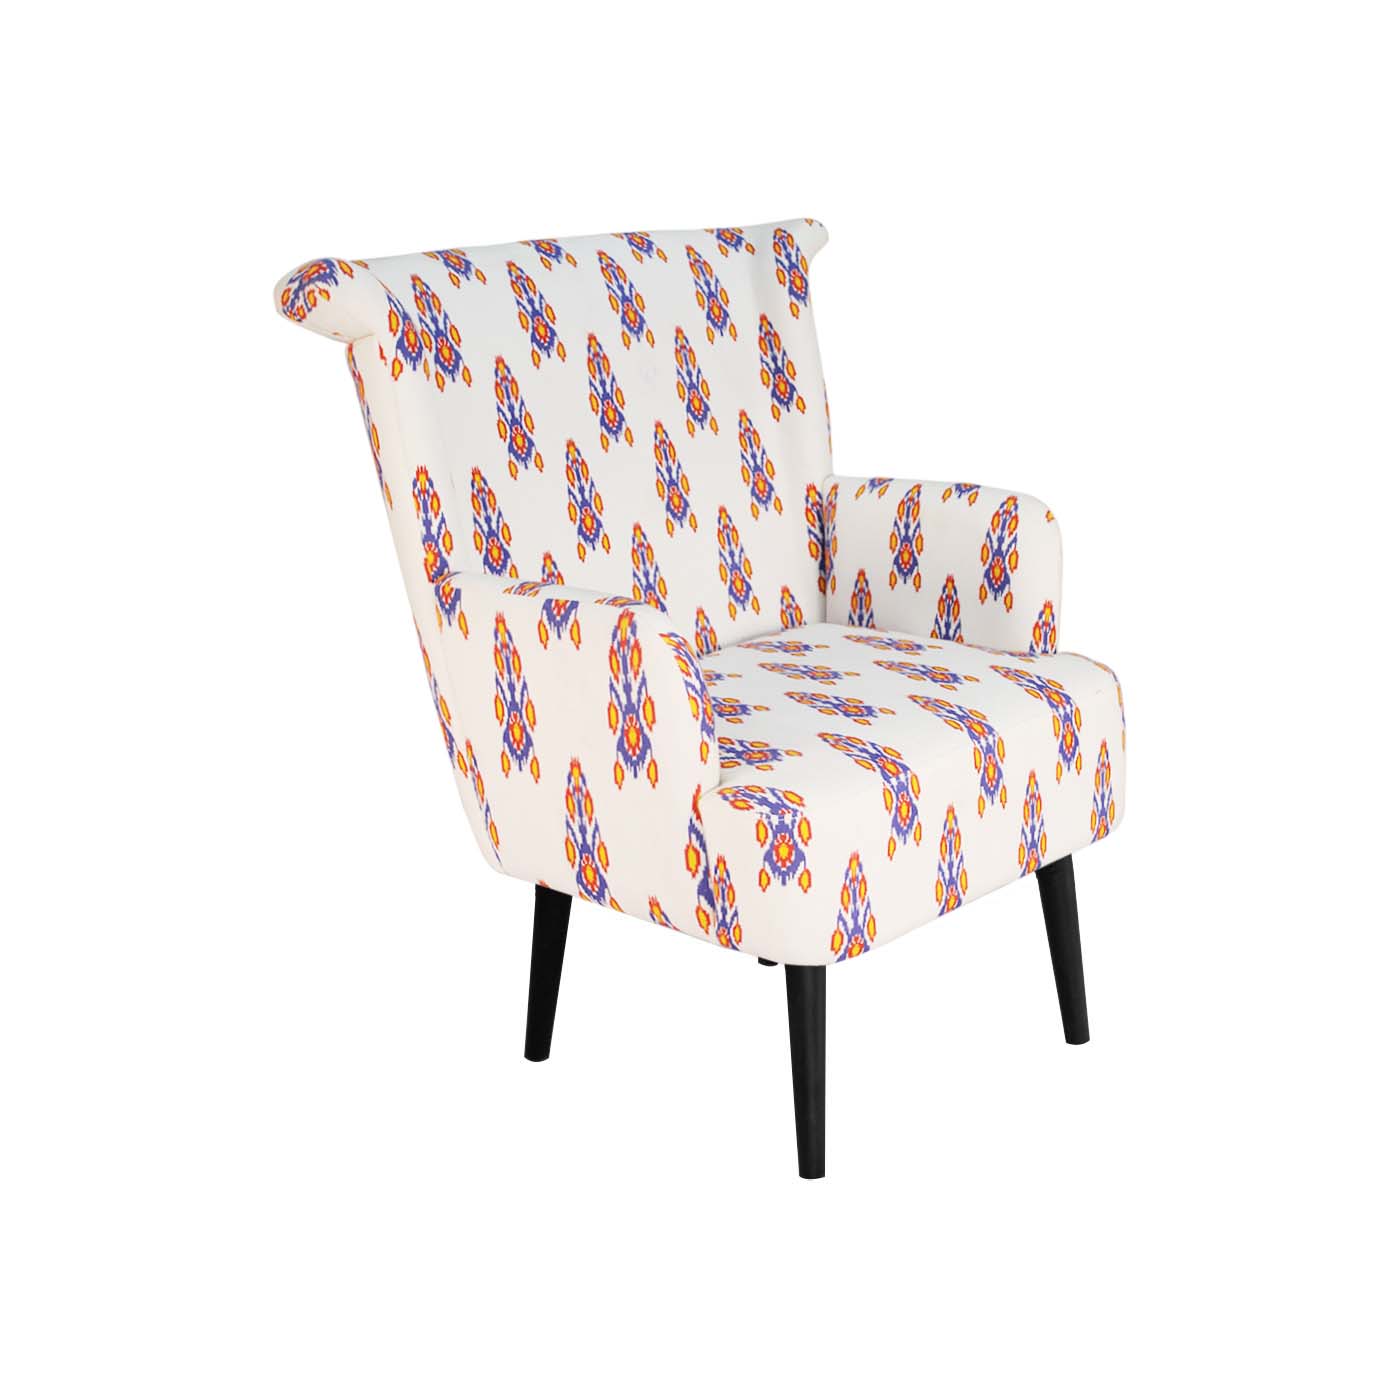 Pompeii Ikat White & Red Black Armchair (Limited Edition)